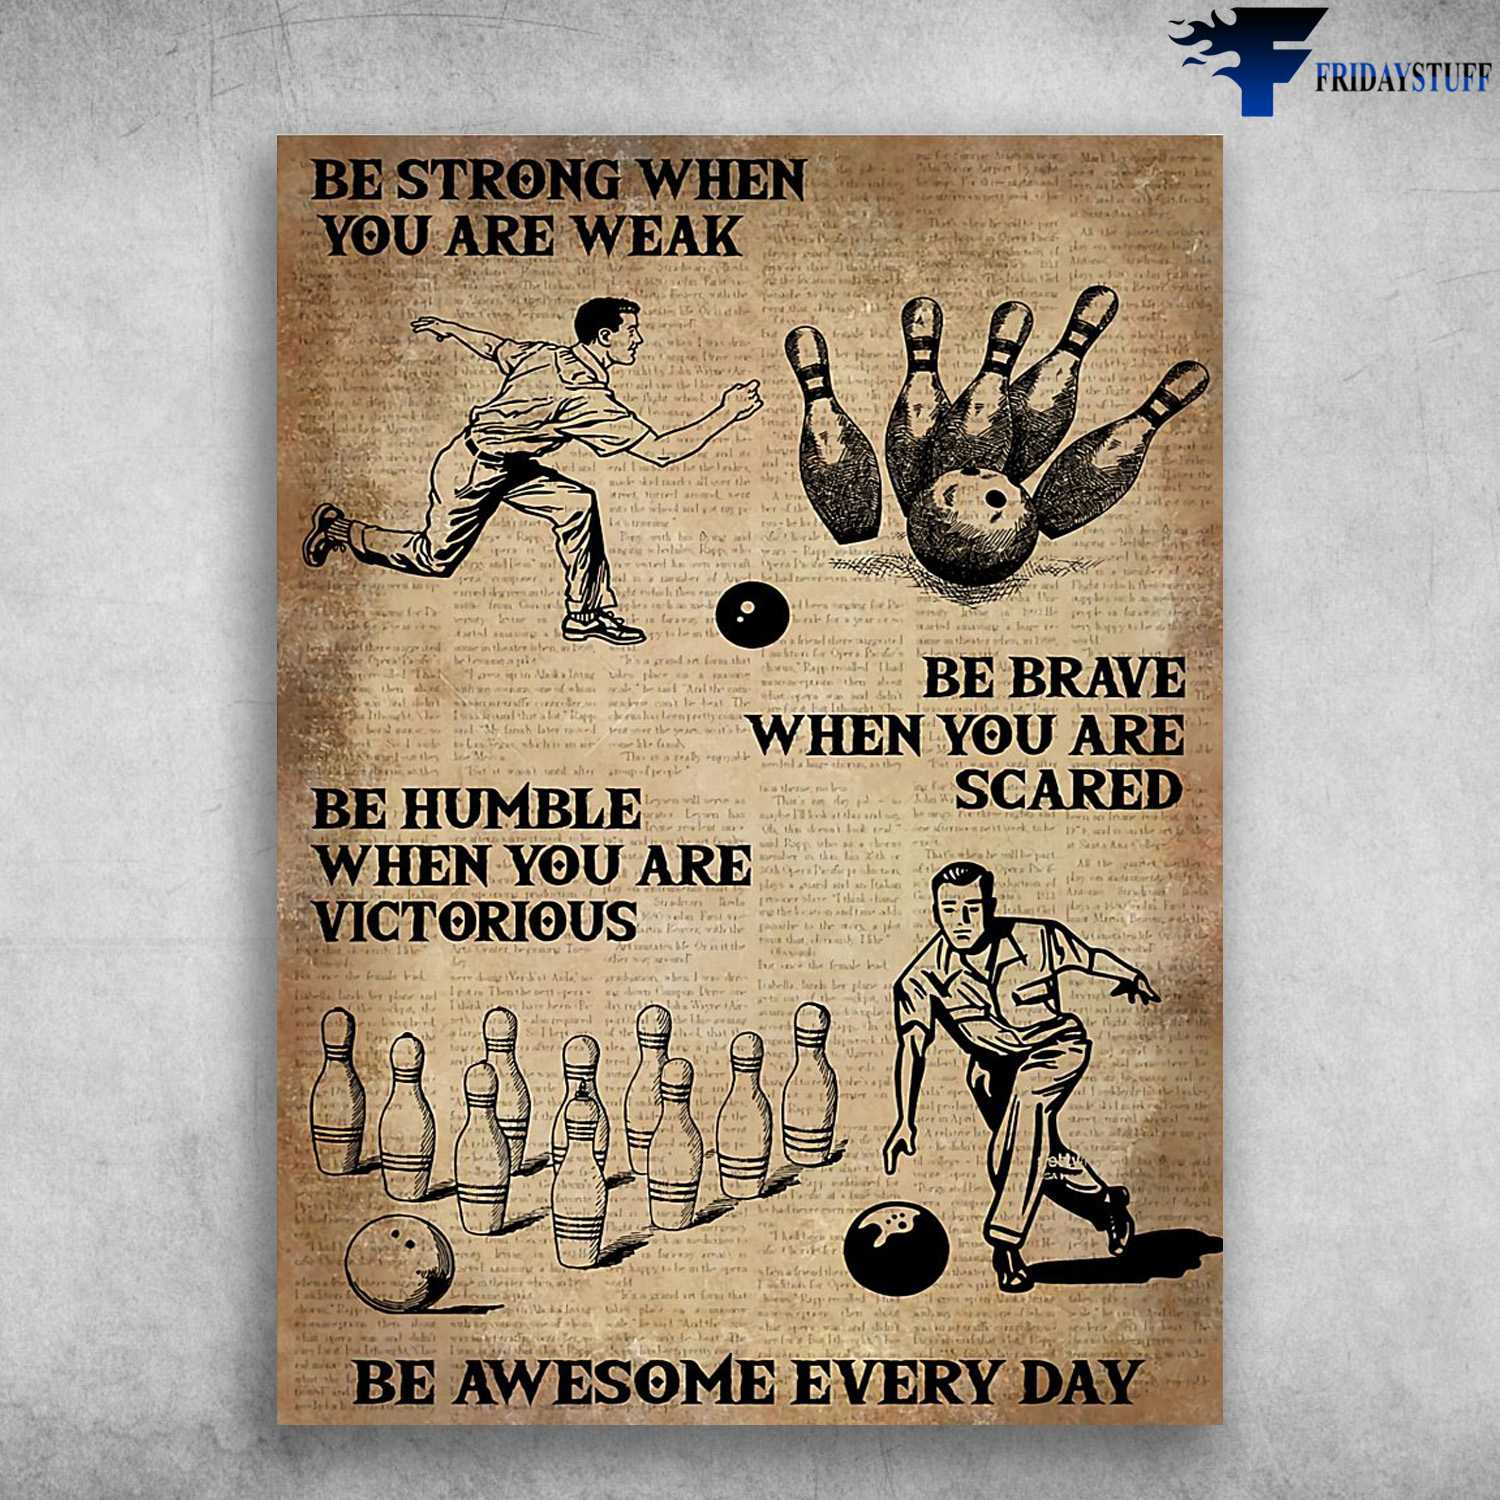 Bowling Poster, Bowling Player - Be Strong When You Are Weak, Be Brave When You Are Scared, Be Humble When You Are Victorious, Be Awesome Everyday